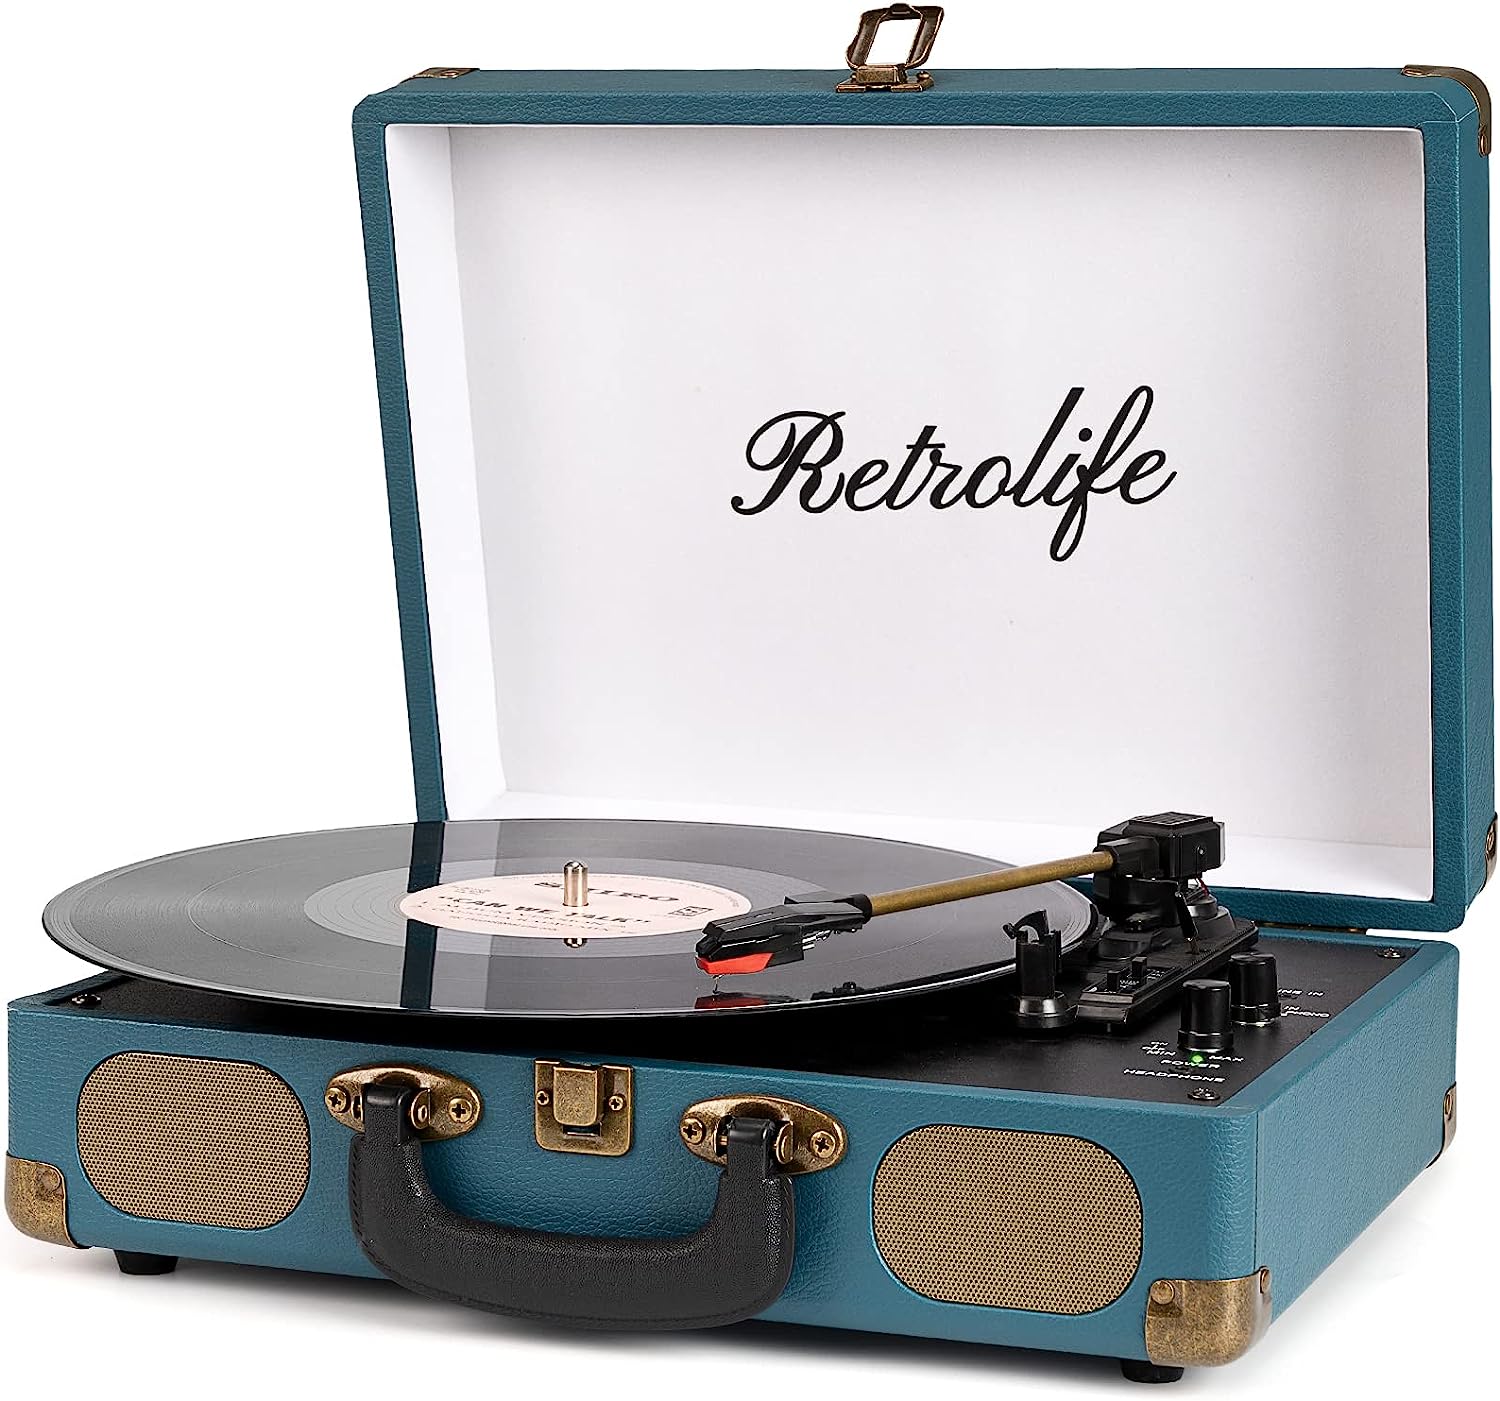 Vinyl Record Player 3-Speed Bluetooth Suitcase Portable Belt-Driven Account Player with Built-in Speakers RCA Line Out AUX in Headphone Jack Vintage Turntable